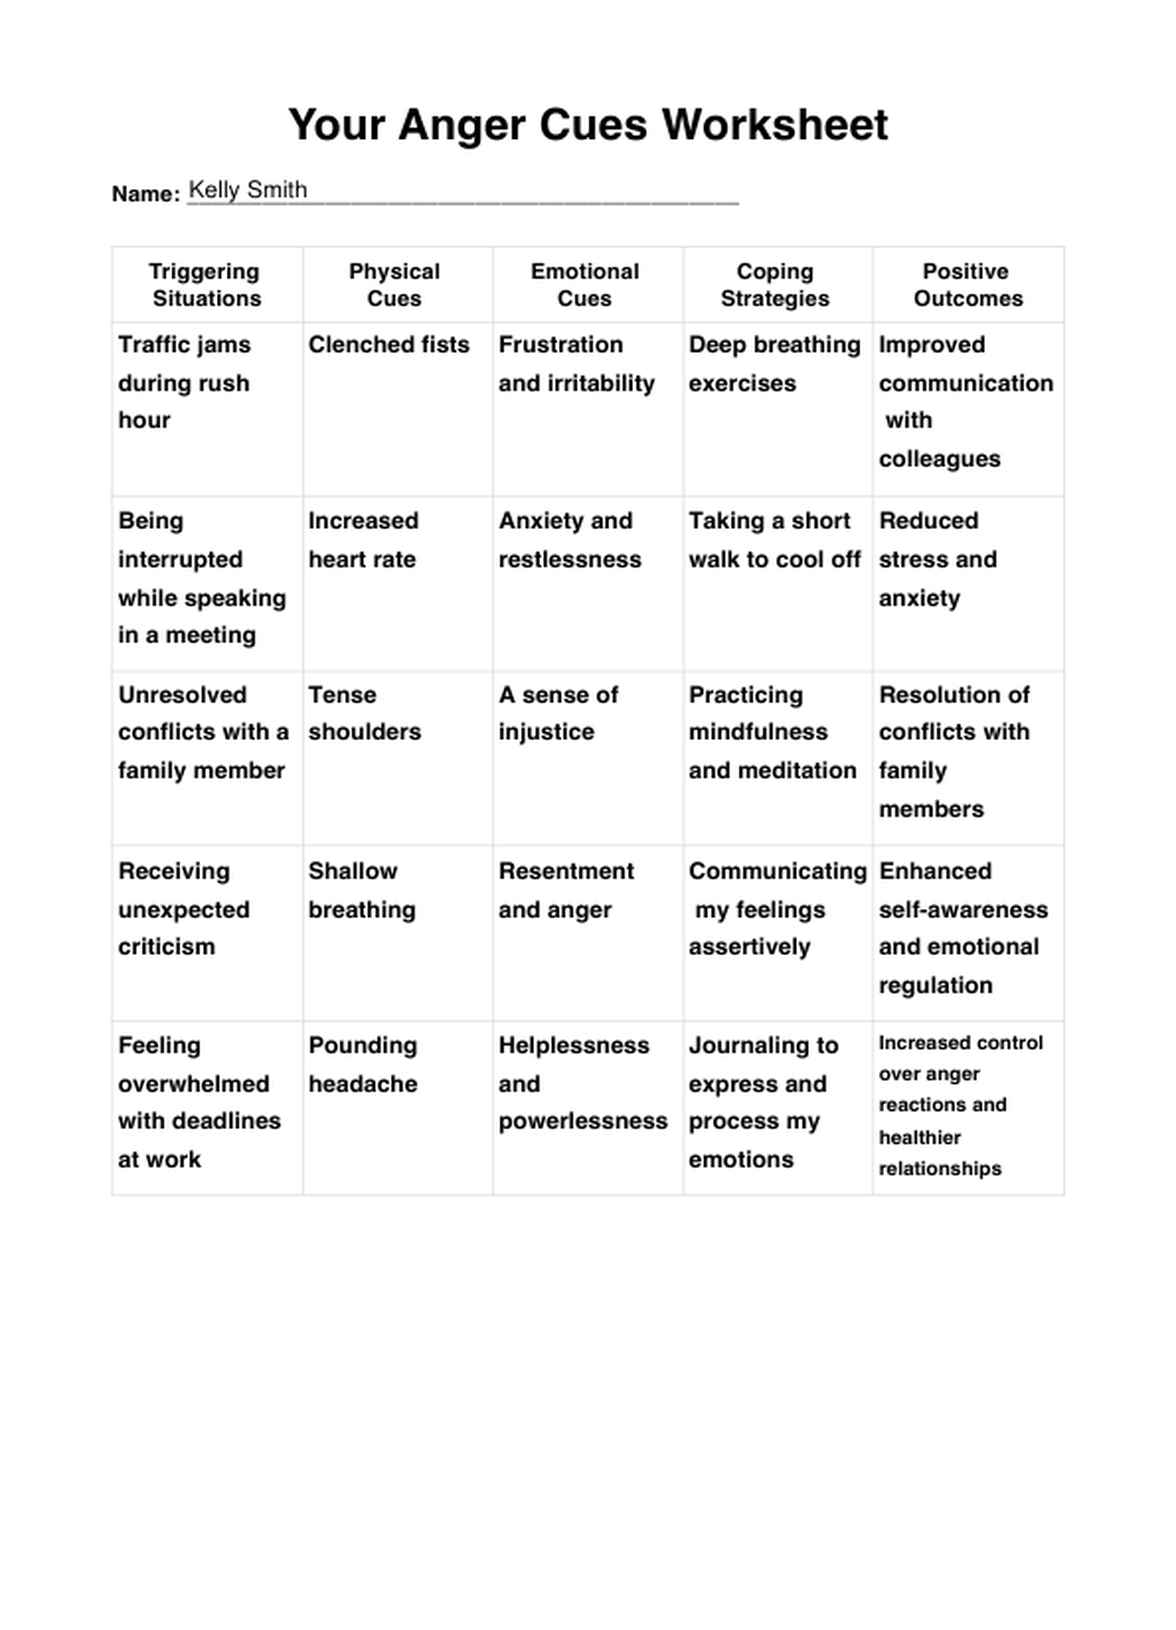 Your Anger Cues Worksheet PDF Example